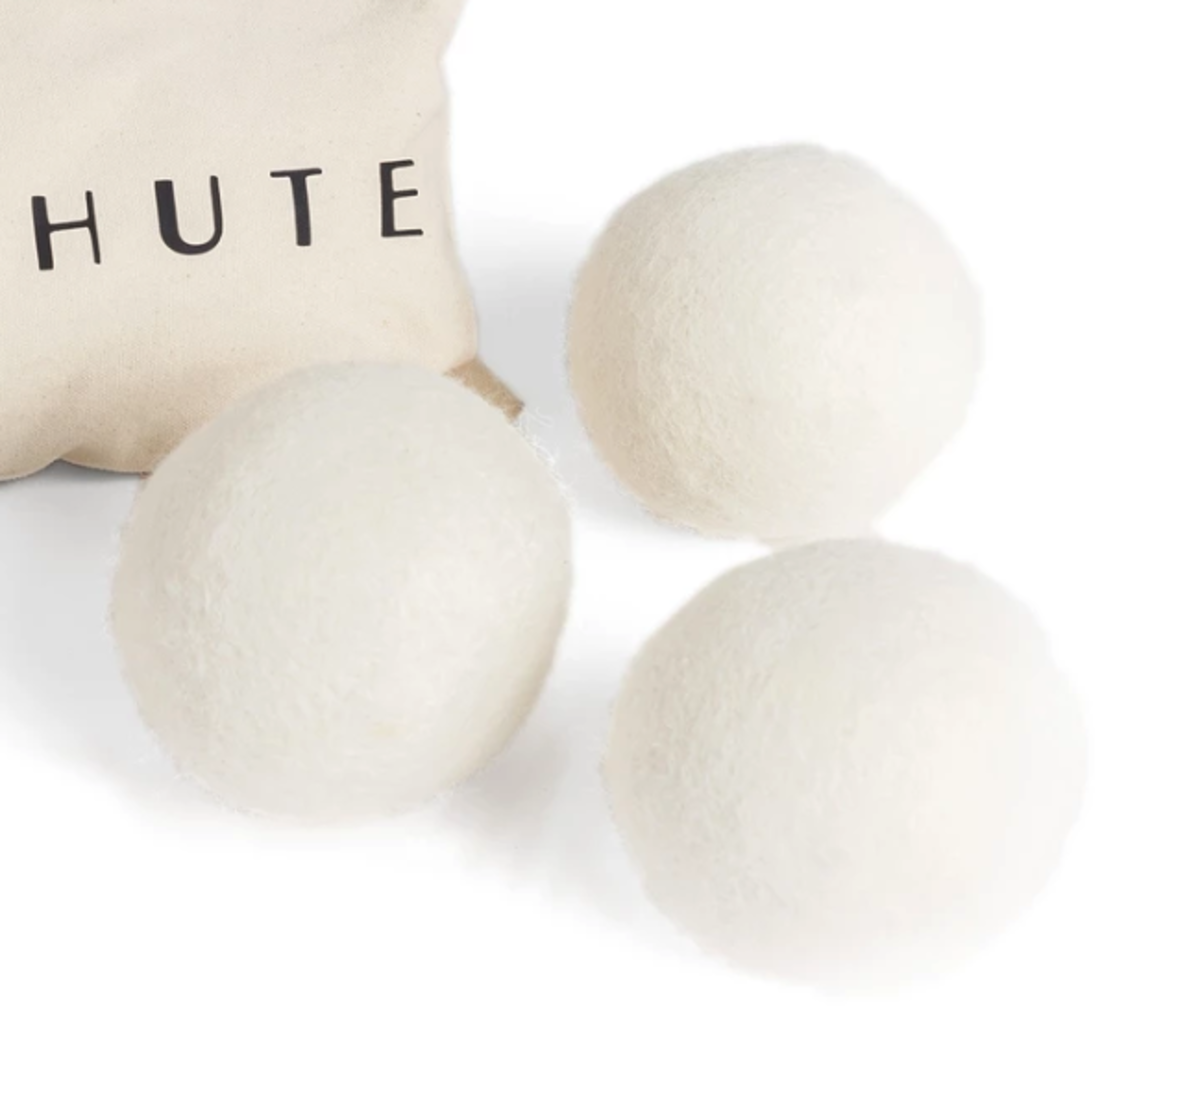 Parachute Wool Dryer Balls, $19, available here.